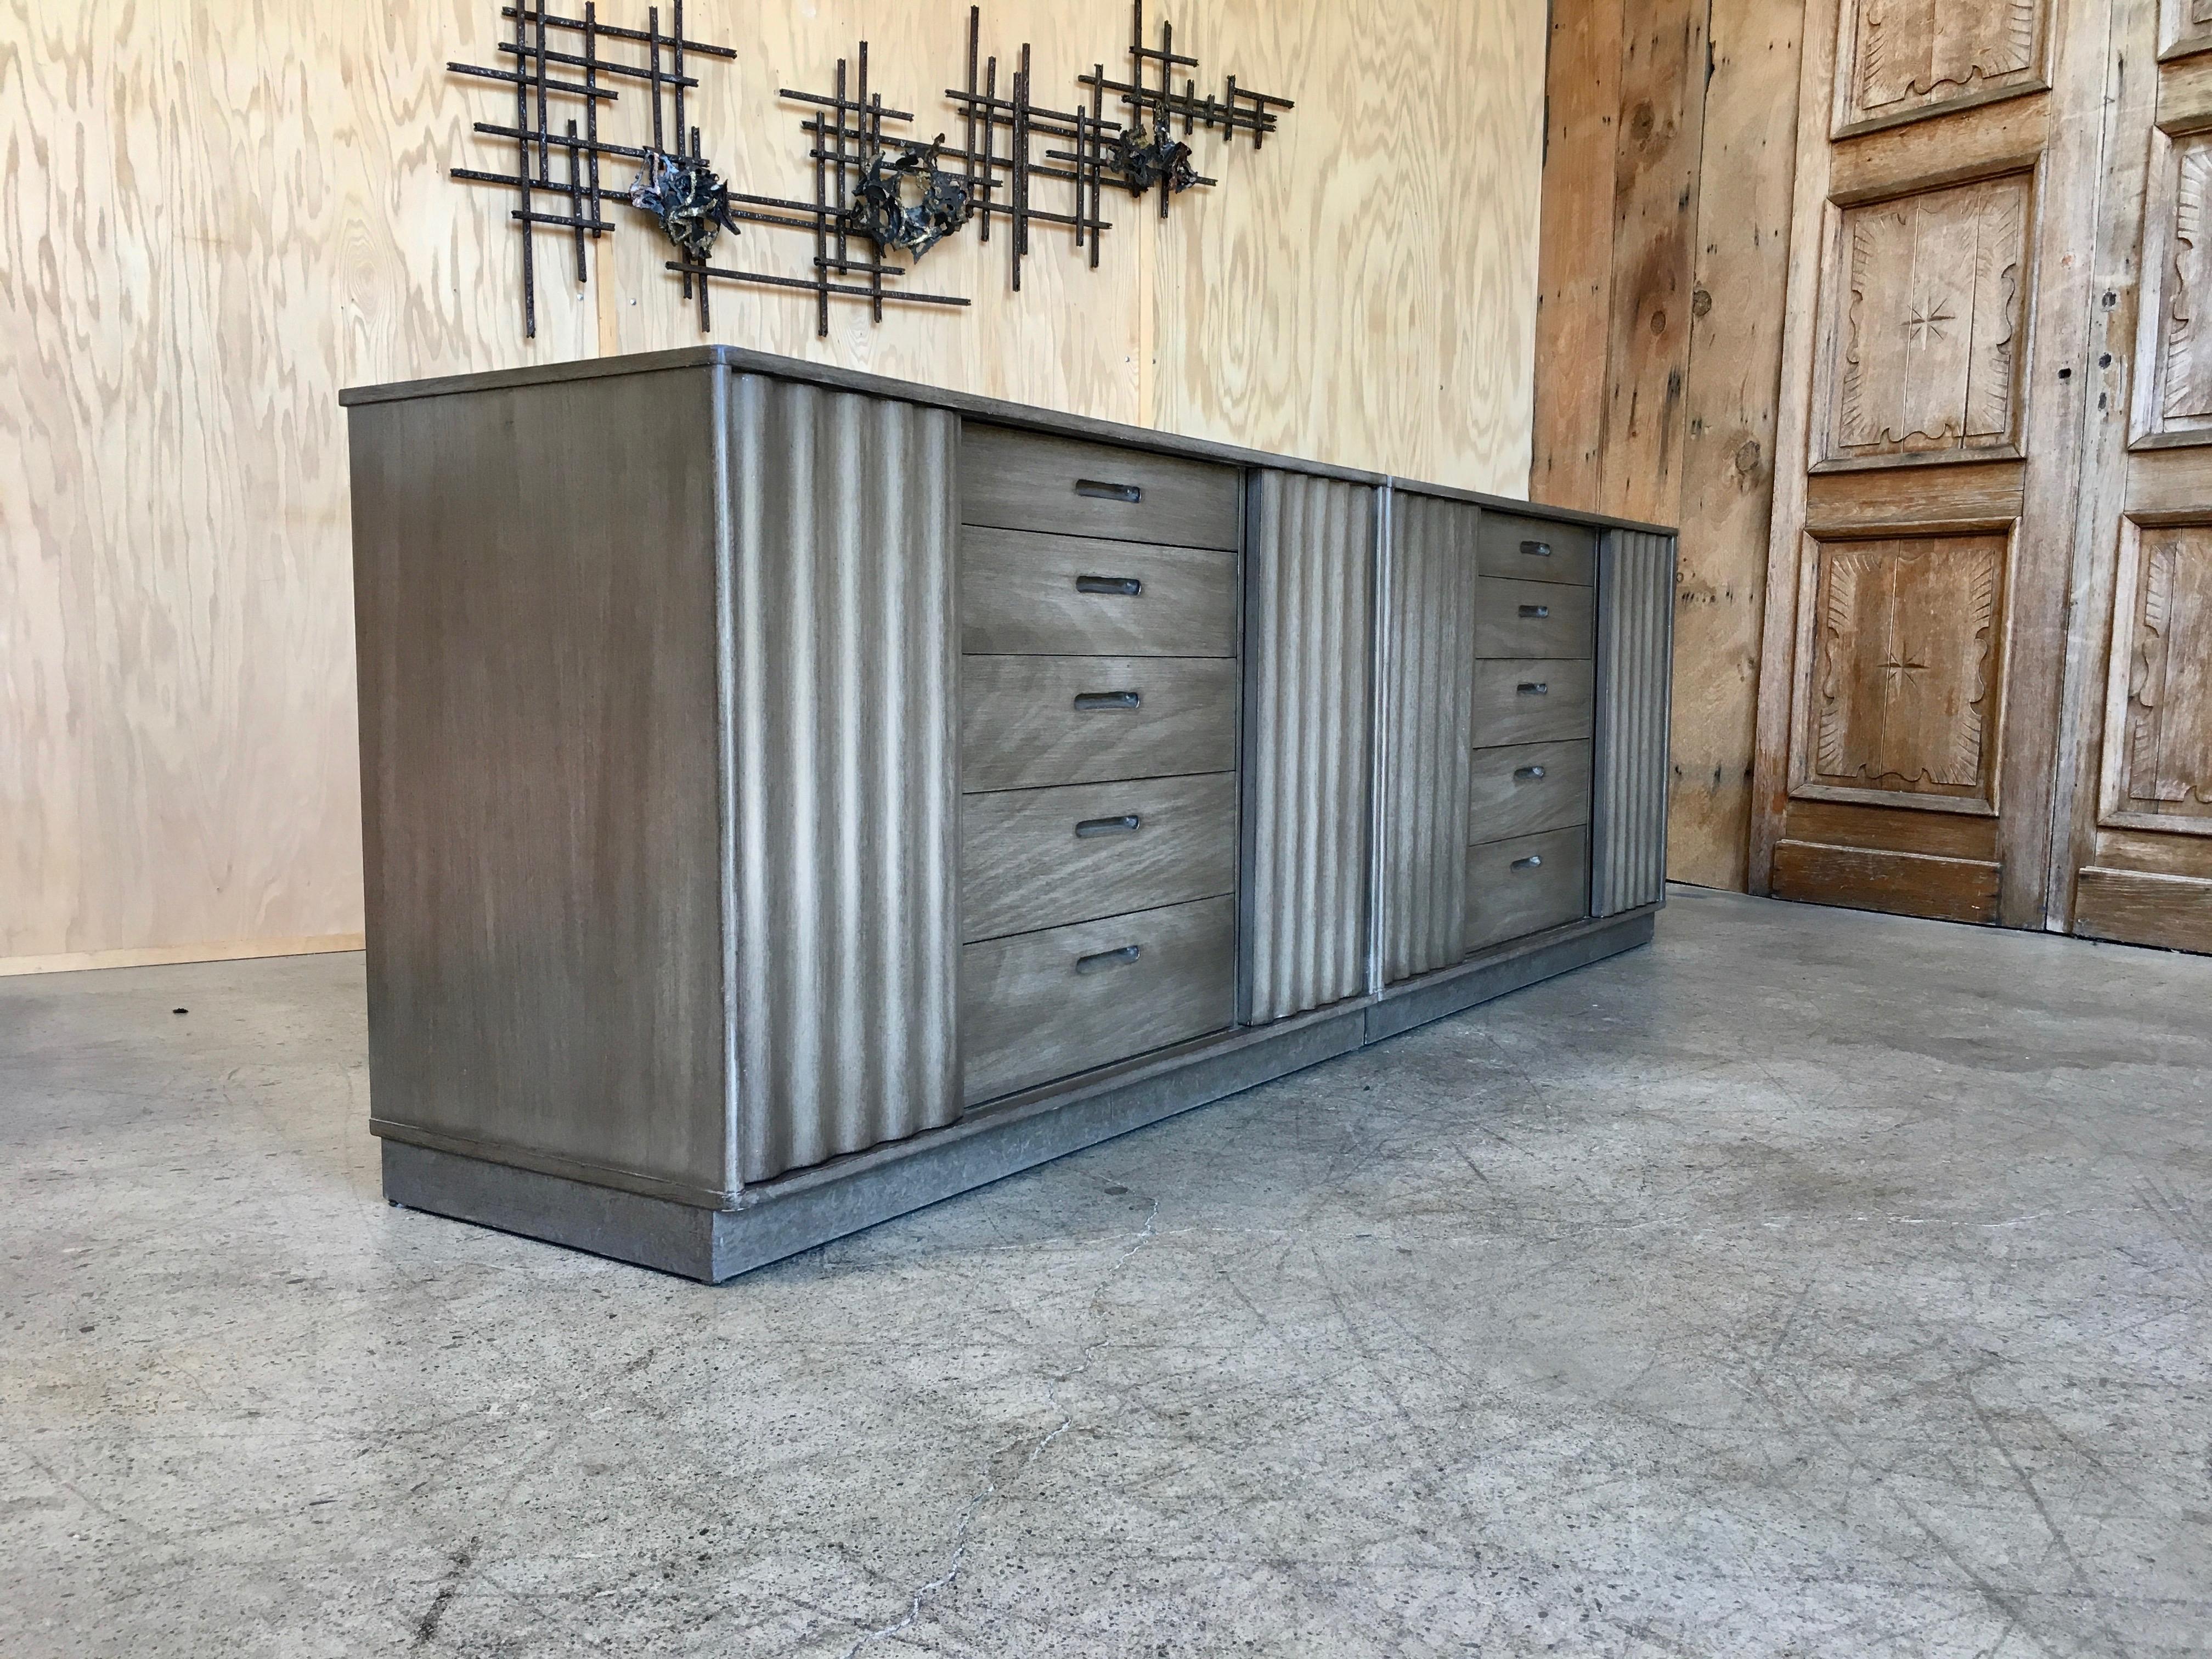 Two Edward Wormley cabinets with corrugated wood sliding doors and center drawer section in a grey brown finish
Each cabinet is 20